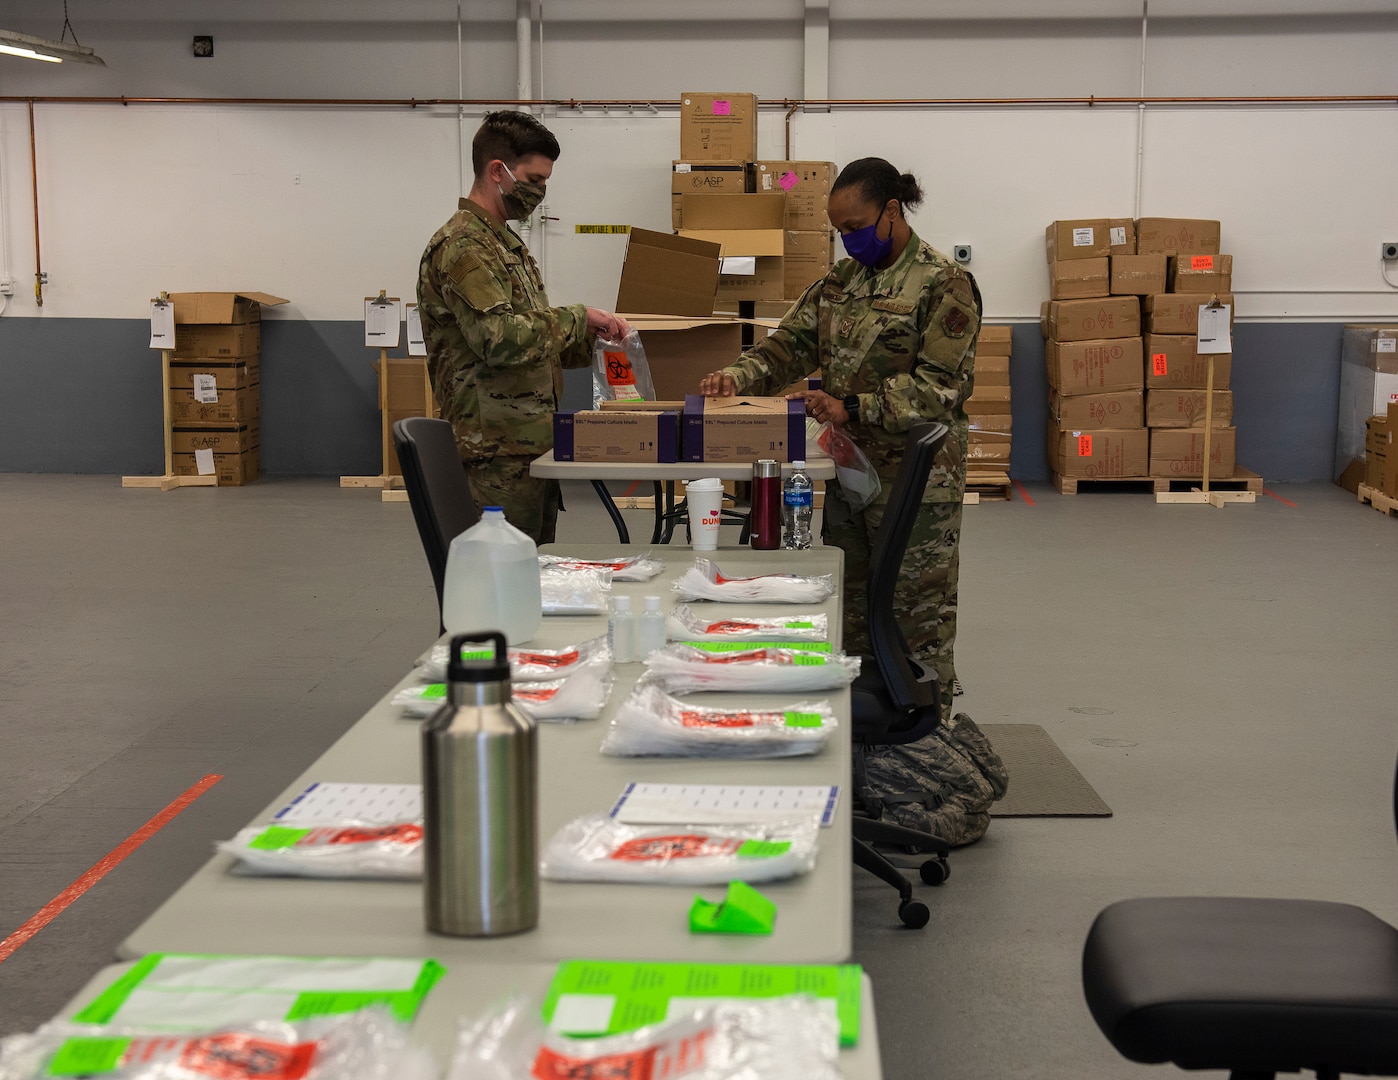 From left, U.S. Air Force Senior Airmen Lucas Wysock and Technical Sgt. Christina McGill, 158th Fighter Wing, Vermont Air National Guard, assemble COVID-19 test kits at the Strategic National Stockpile Warehouse, August 27, 2020. Airmen from across the 158th Fighter Wing have supported operations at the SNS Warehouse since March 2020, and continue to provide critical logistical support to enable Vermont's efforts to distribute Personal Protective Equipment throughout the state and conduct widespread testing for COVID-19. (U.S. Army National Guard photo by Capt. J. Scott Detweiler)